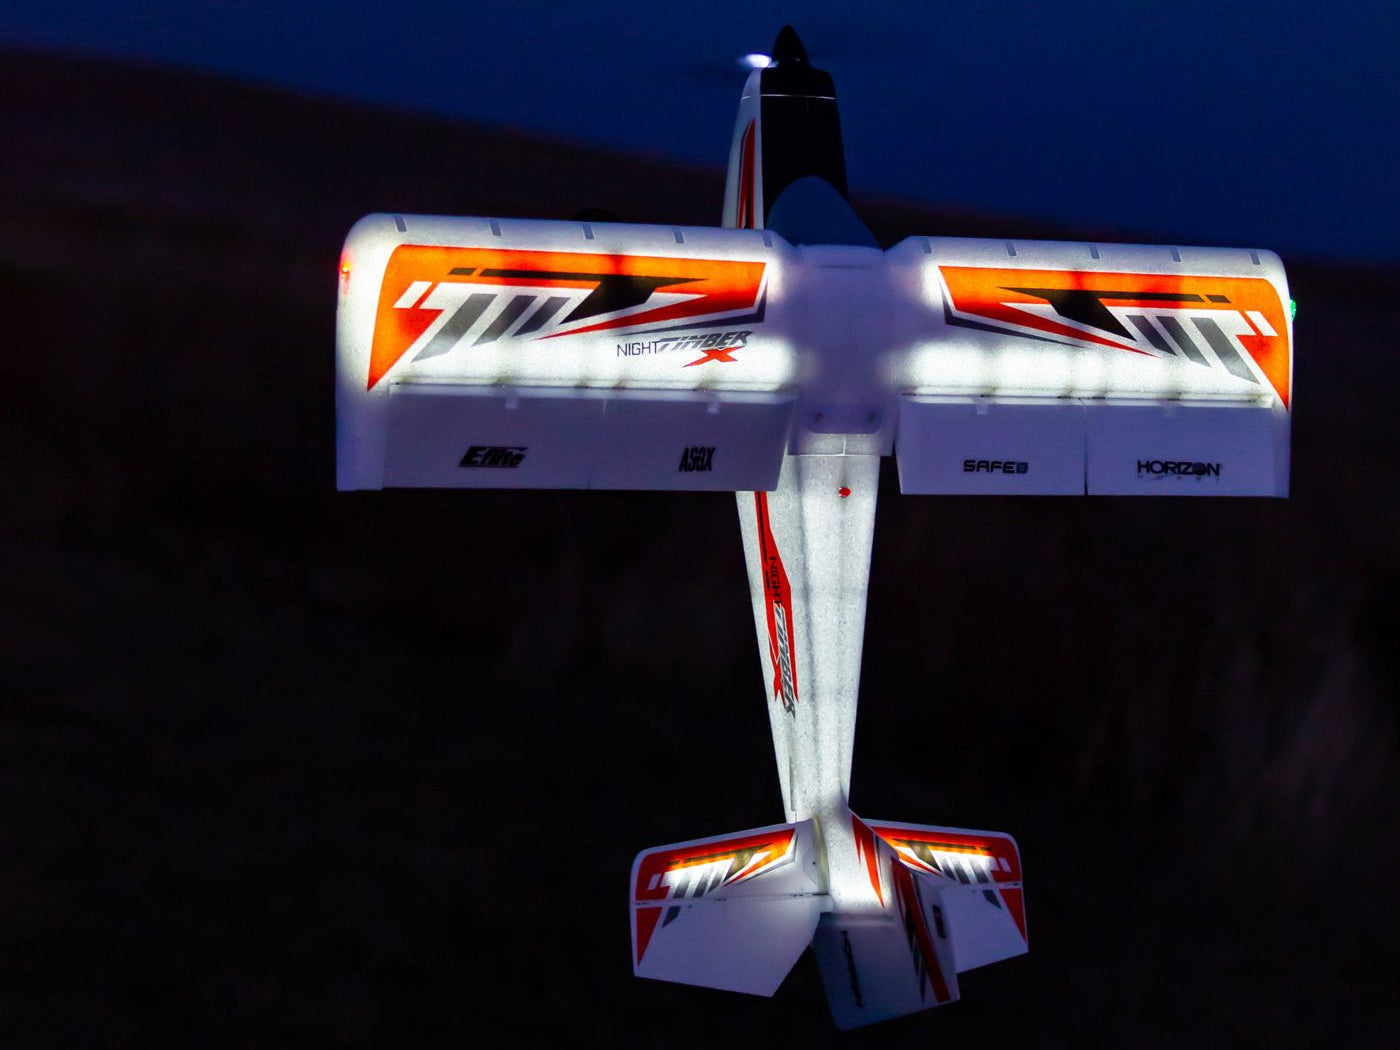 E-Flite Night Timber X 1.2m BNF Basic with AS3X & SAFE Select EFL13850